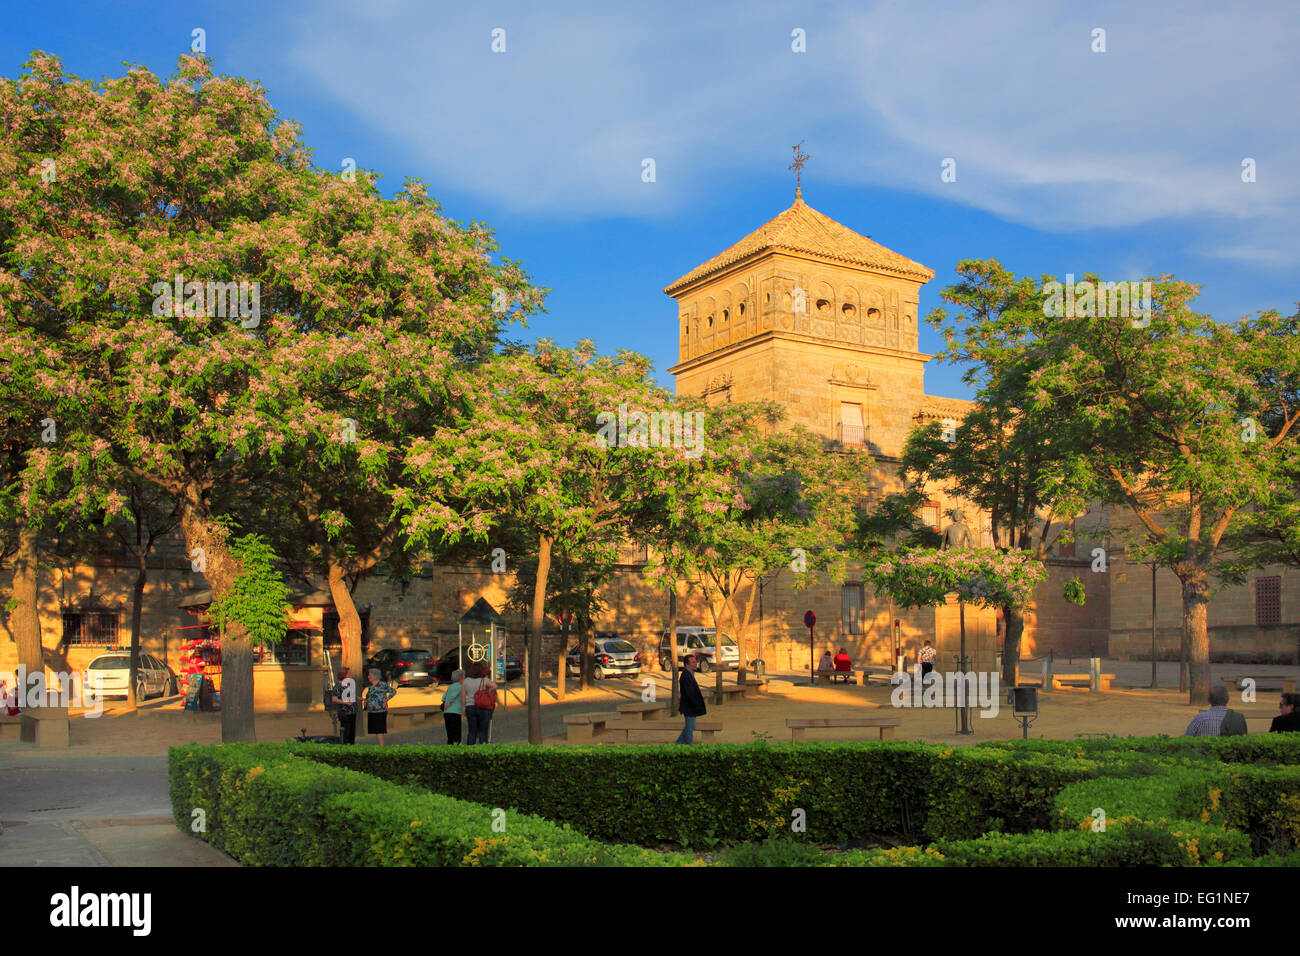 City Park, a Ubeda, Andalusia, Spagna Foto Stock